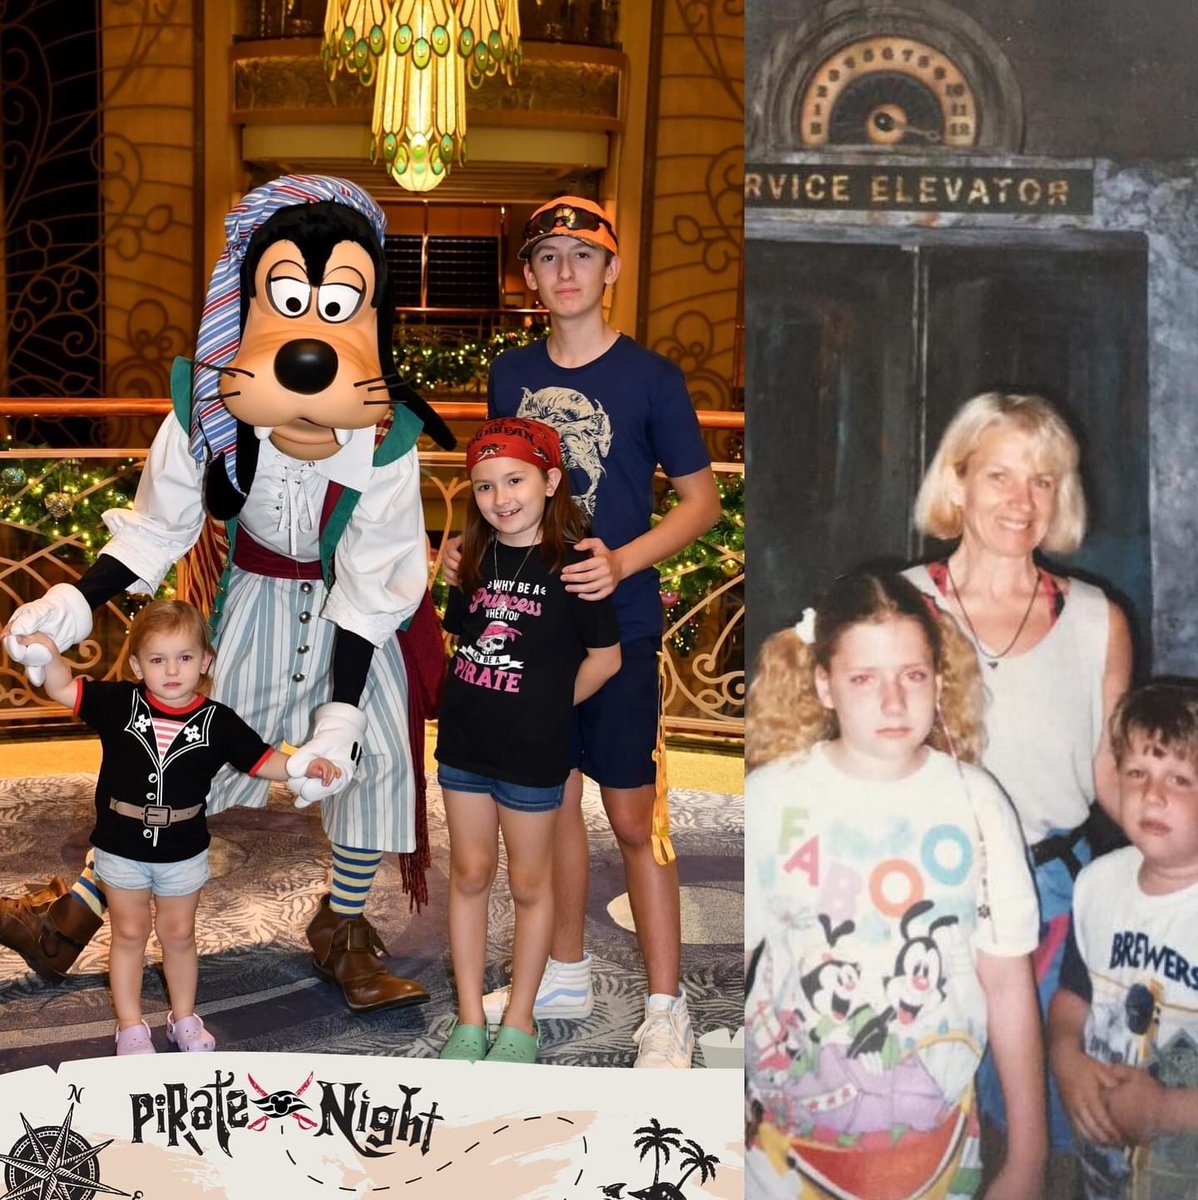 #HappyMothersDay to all who have stepped in to the role of mom.🌷 Special shoutout to my mom- every day, I strive to pass on her love & wisdom to my 3 pirates. 💕#HappyMothersDay #DisneyMoms #DisneyCruiseLine #90sDisney #DisneyTravelAgent #DisneyVacation #personaltravelmanagement